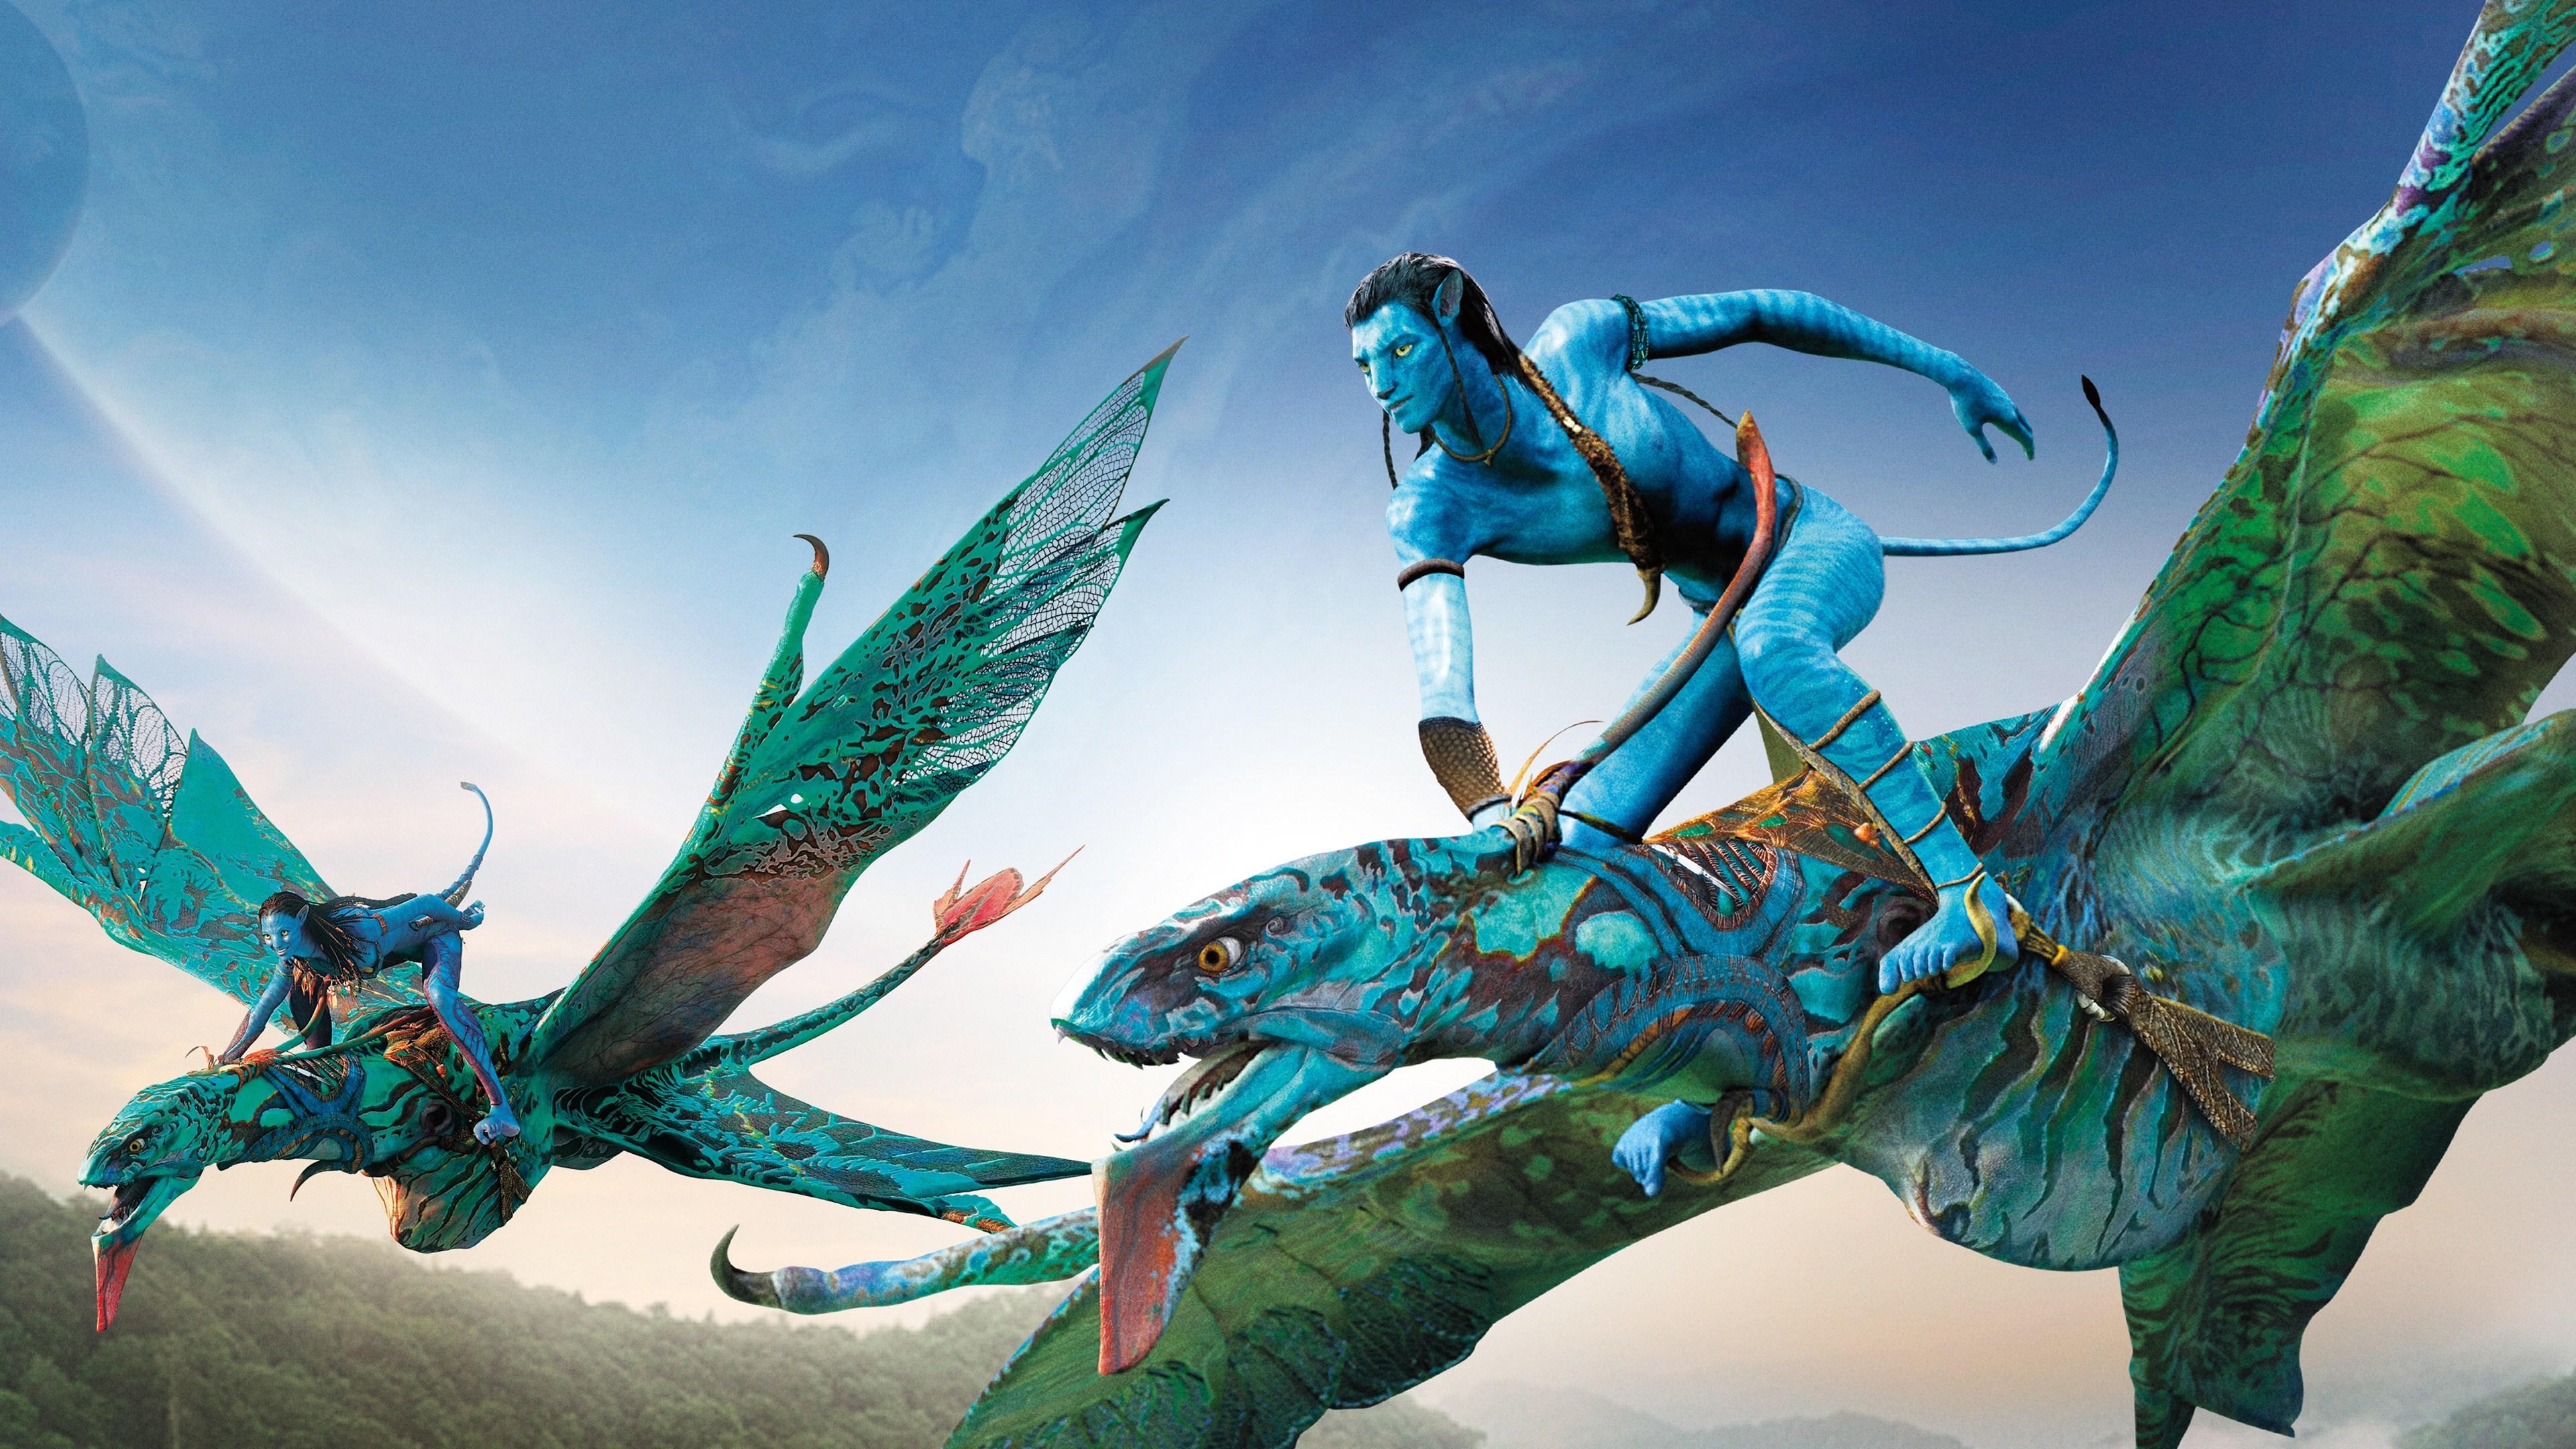 Download Avatar 2 wallpapers for mobile phone free Avatar 2 HD pictures